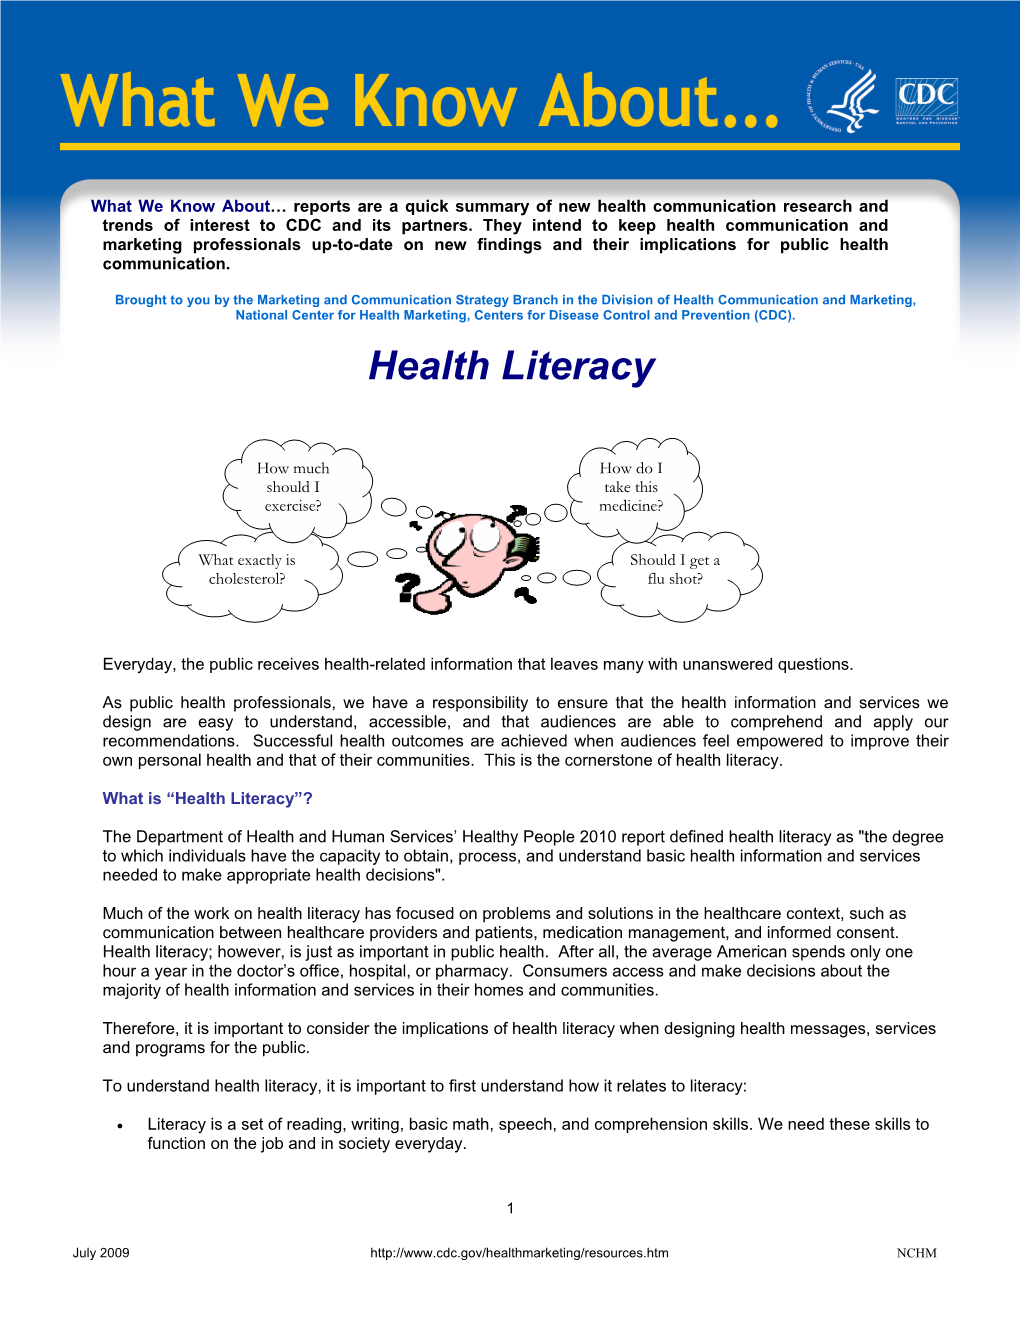 What We Know About…Health Literacy